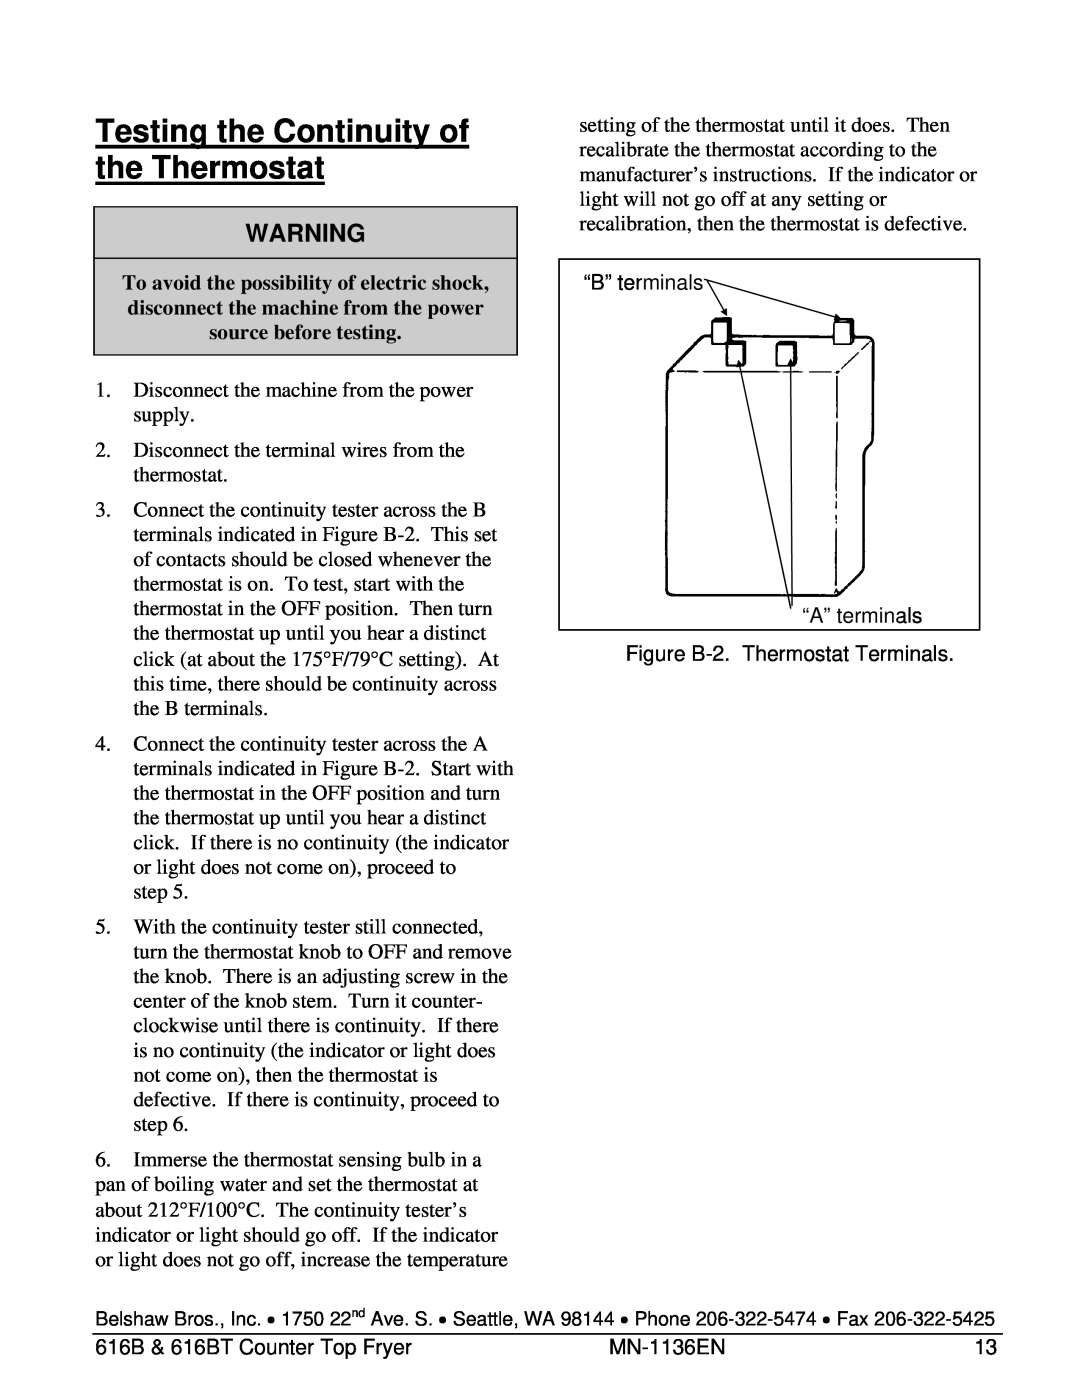 Belshaw Brothers 616BT manual Testing the Continuity of the Thermostat 